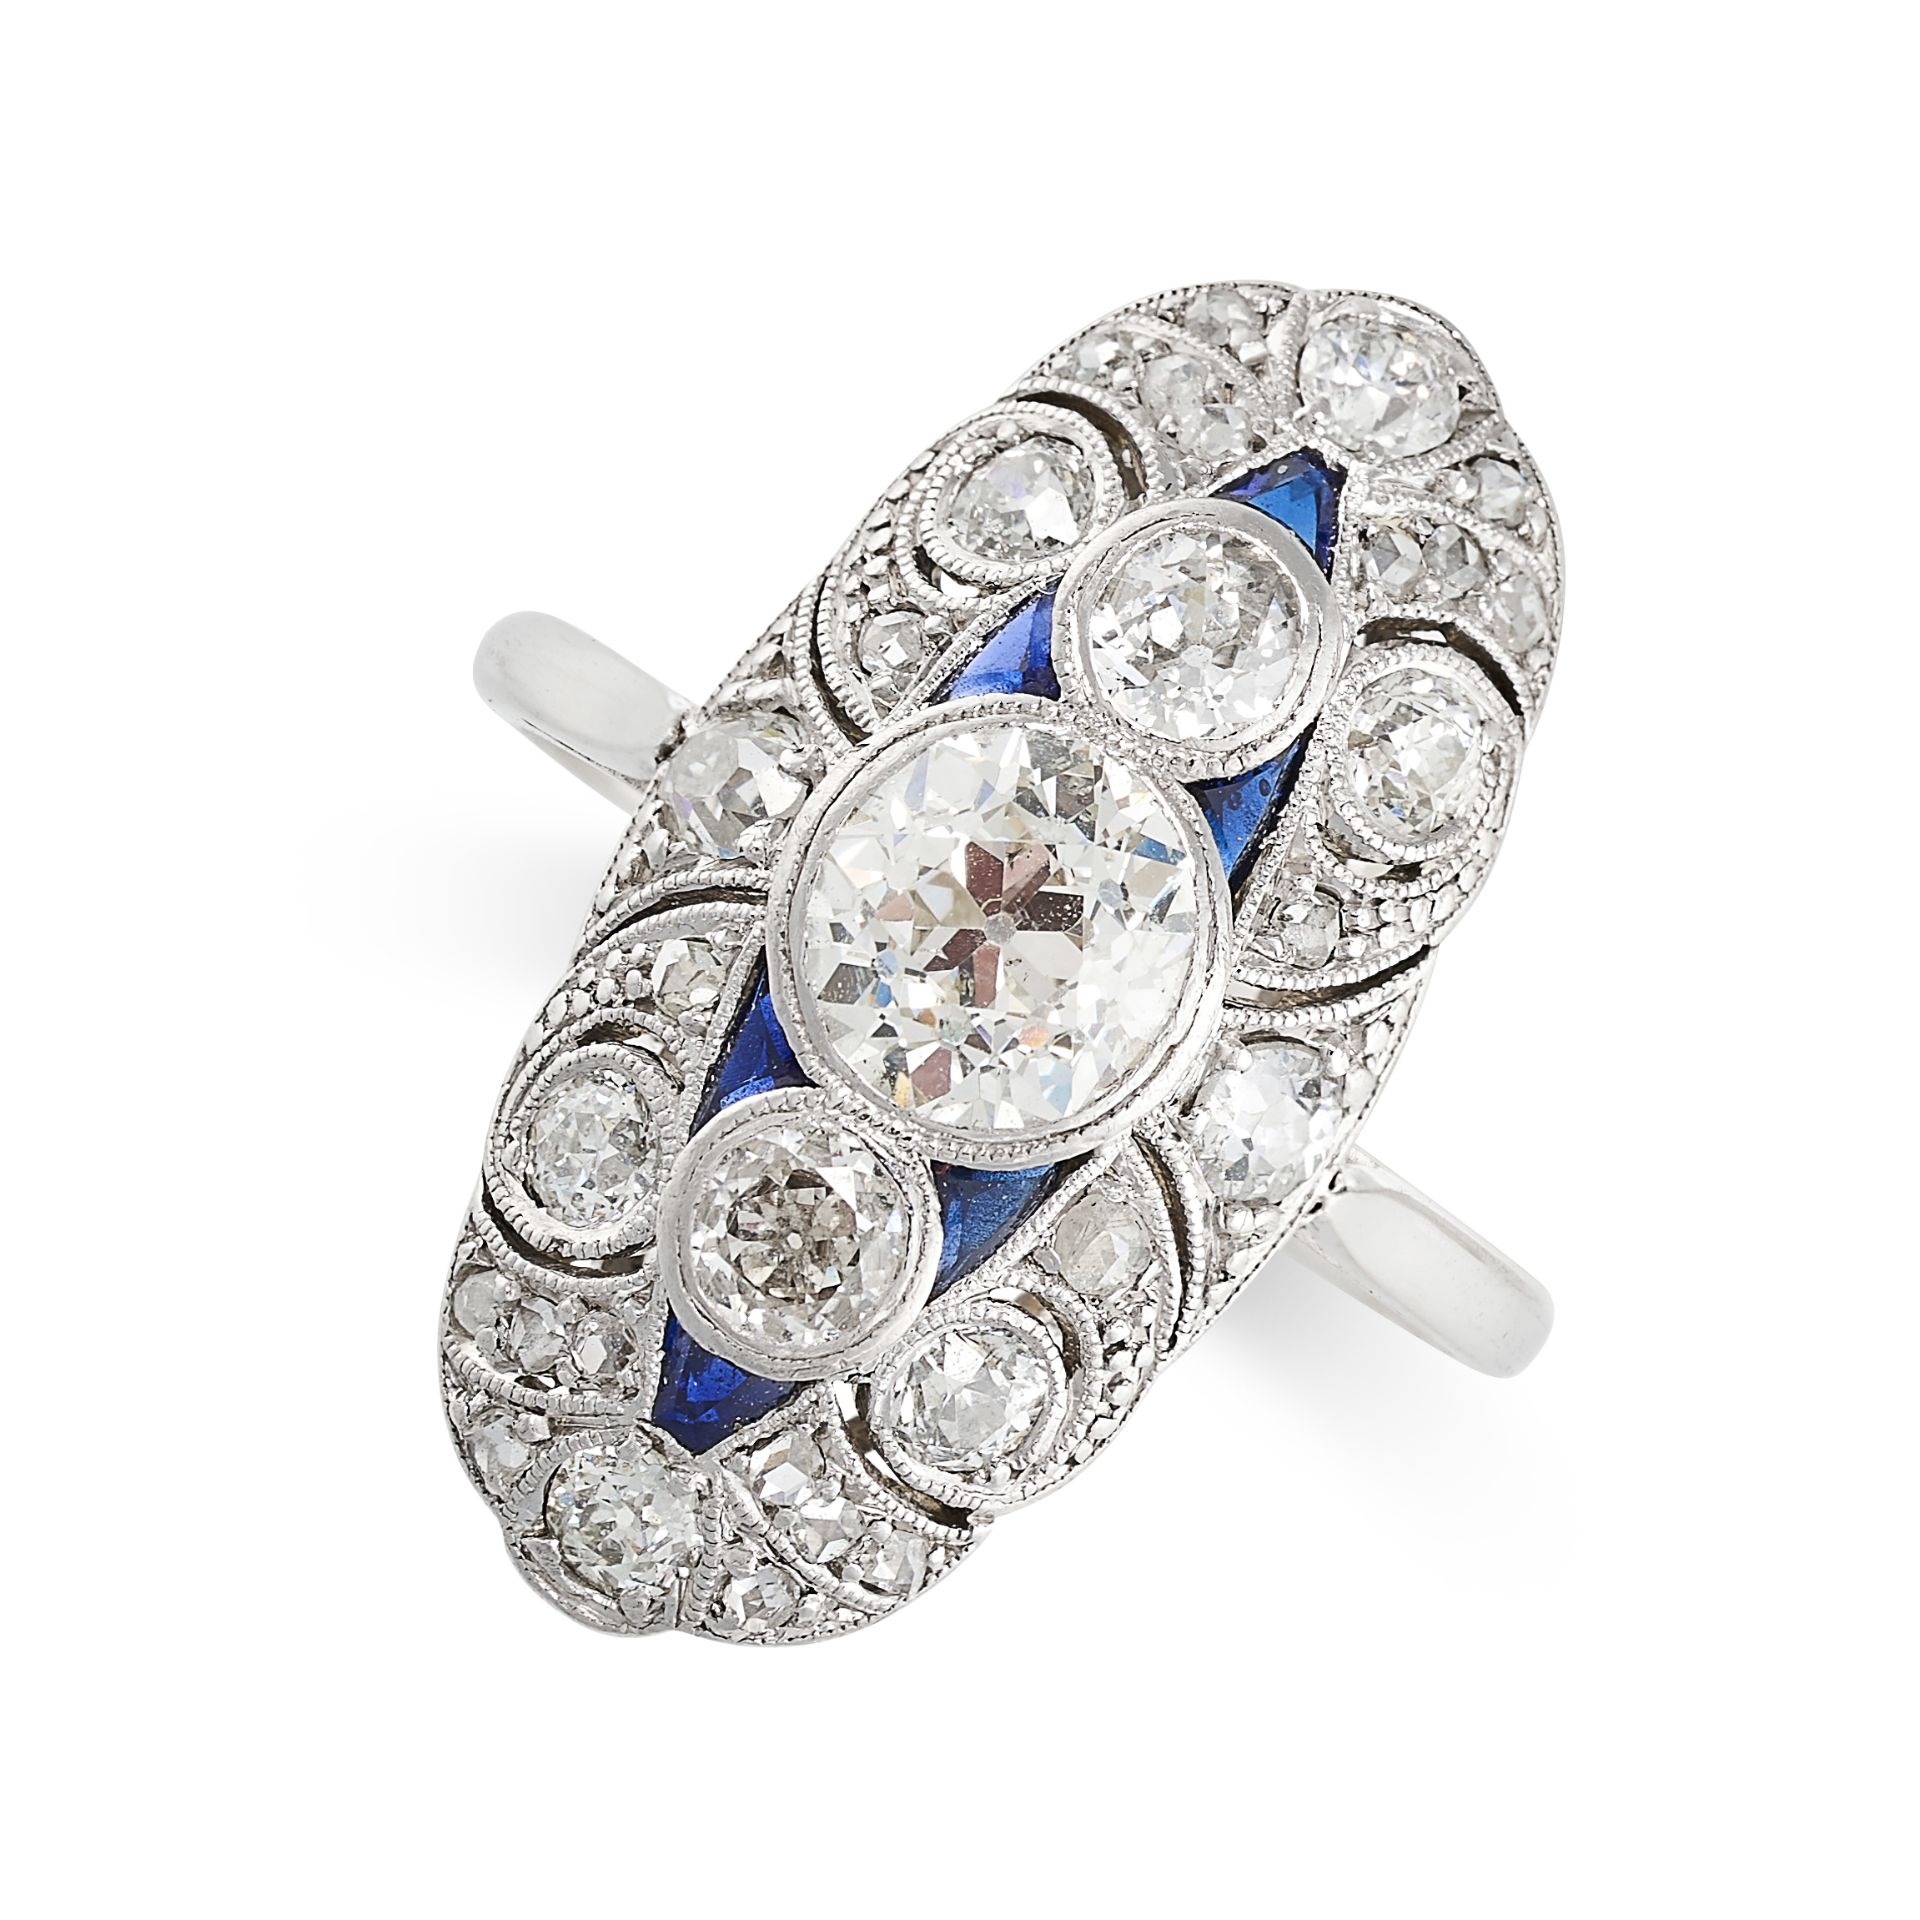 AN ART DECO DIAMOND AND SAPPHIRE RING, EARLY 20TH CENTURY Cushion-shaped and rose-cut diamonds,